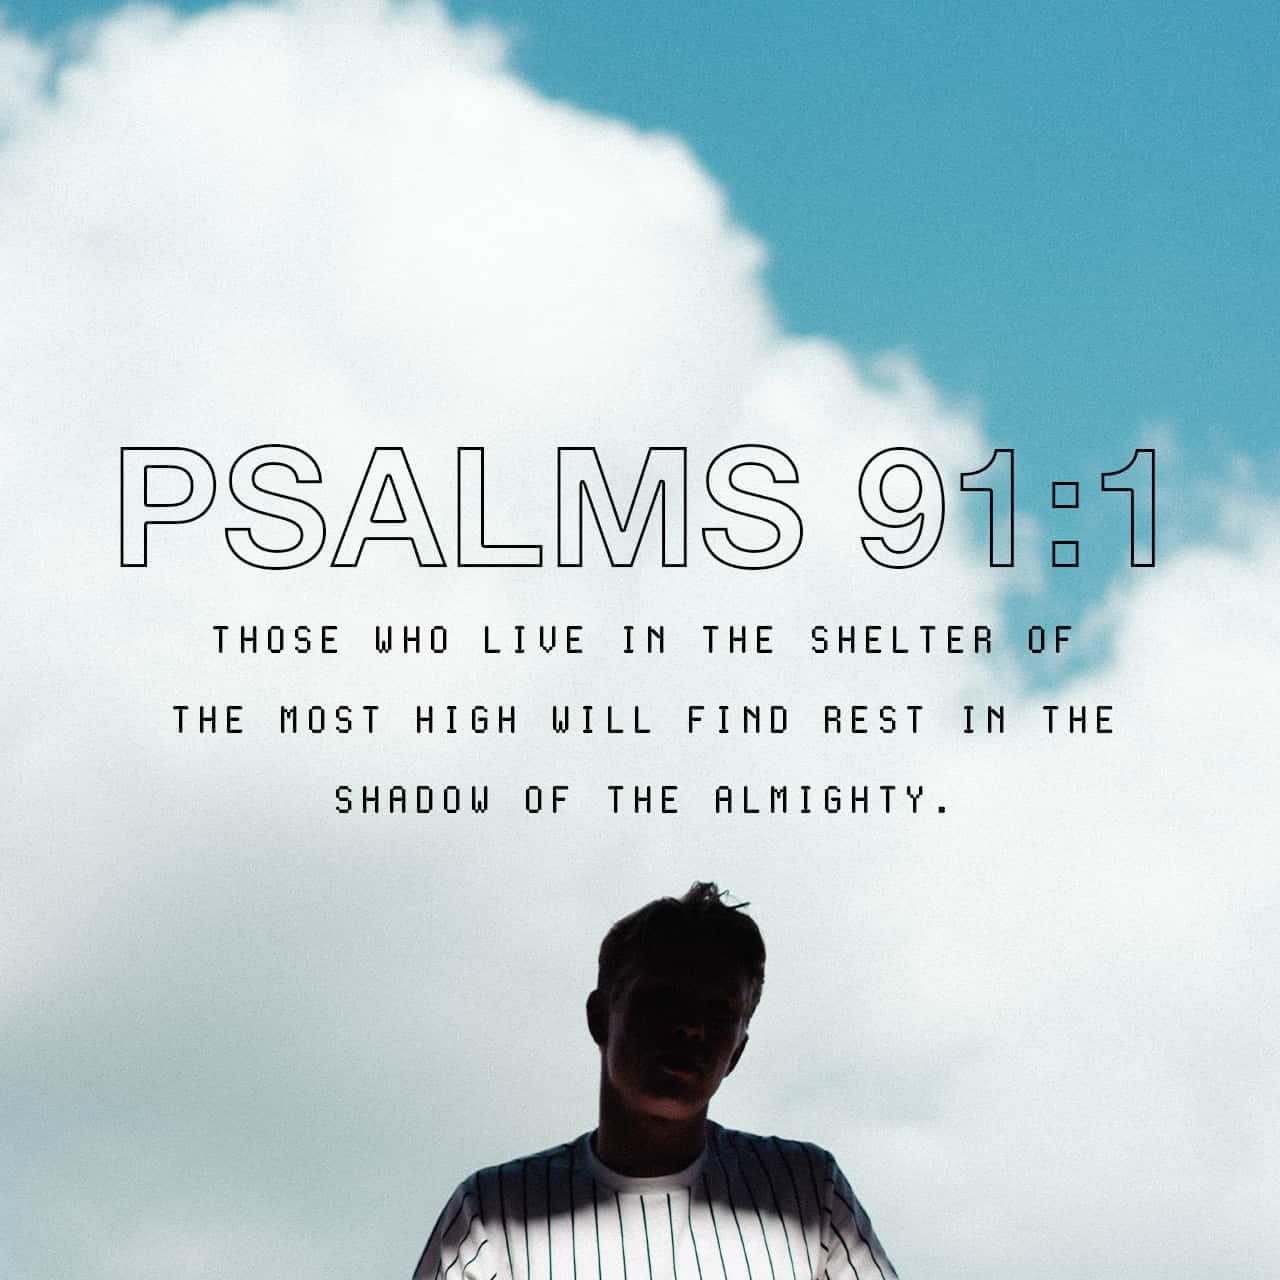 Bible Verse of the Day - day 89 - image 56535 (Psalms 91:1-16)